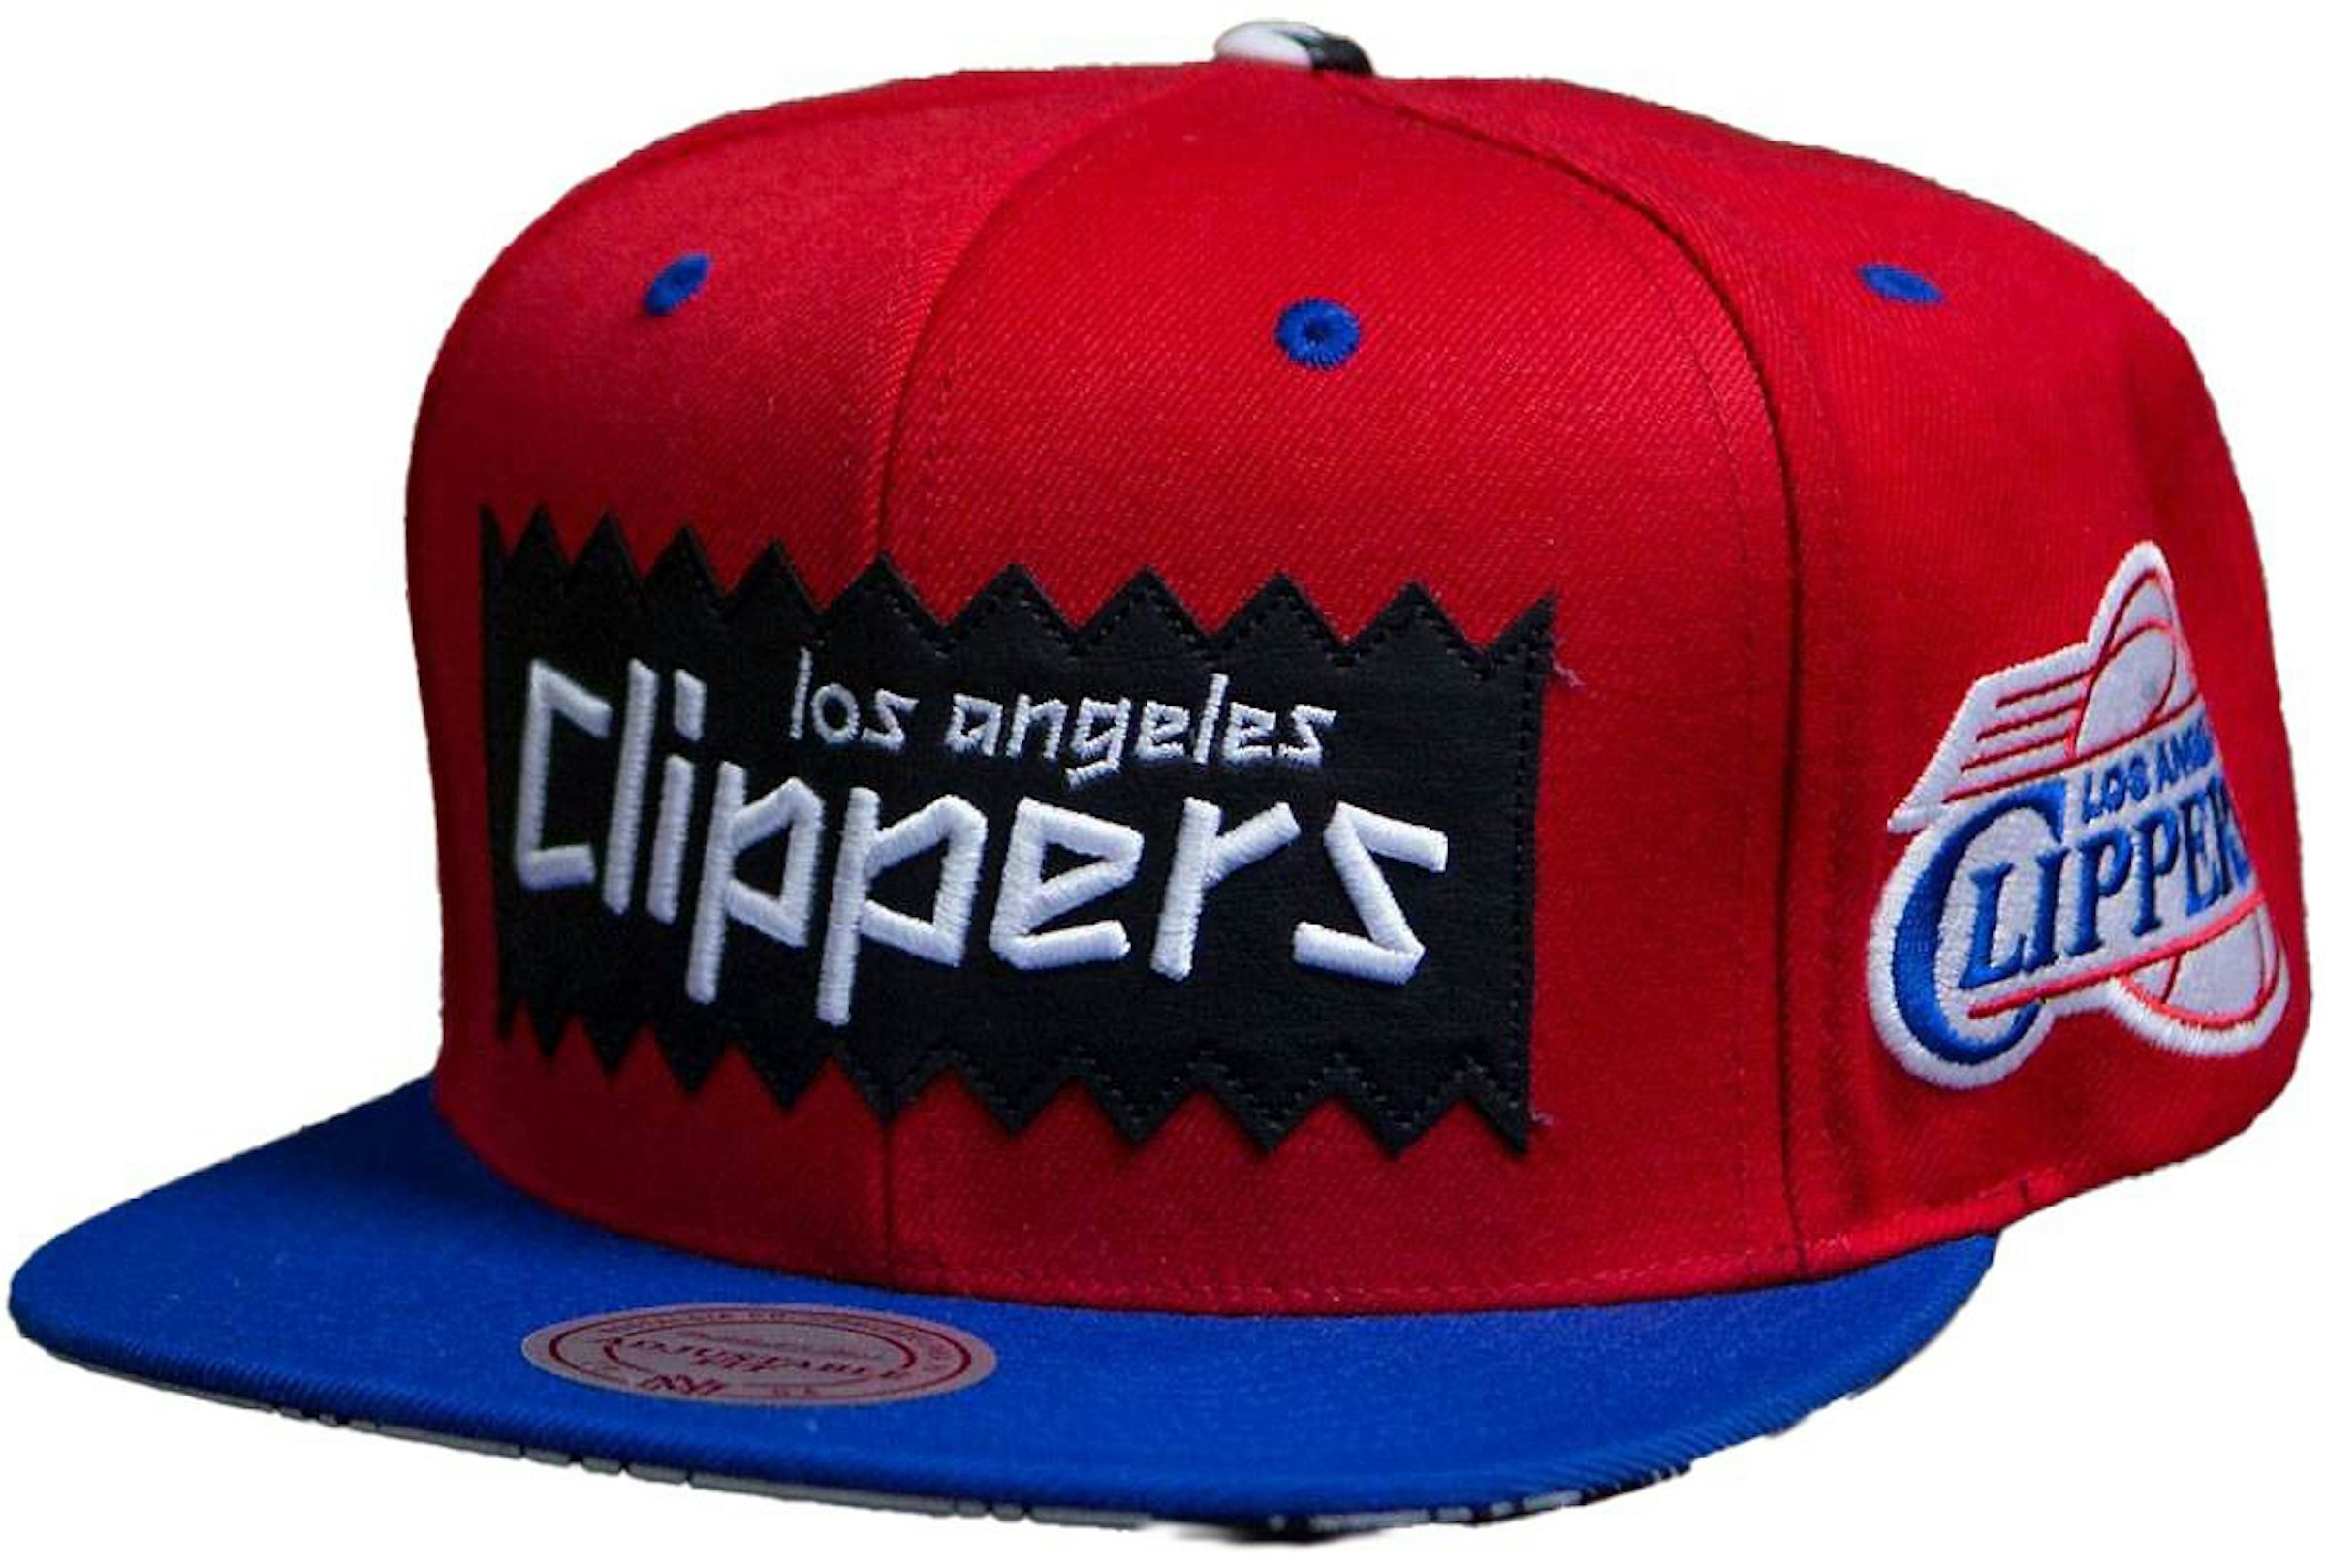 BAIT x NBA x Mitchell And Ness Los Angeles Clippers STA3 Wool Snapback Cap  (red / royal)